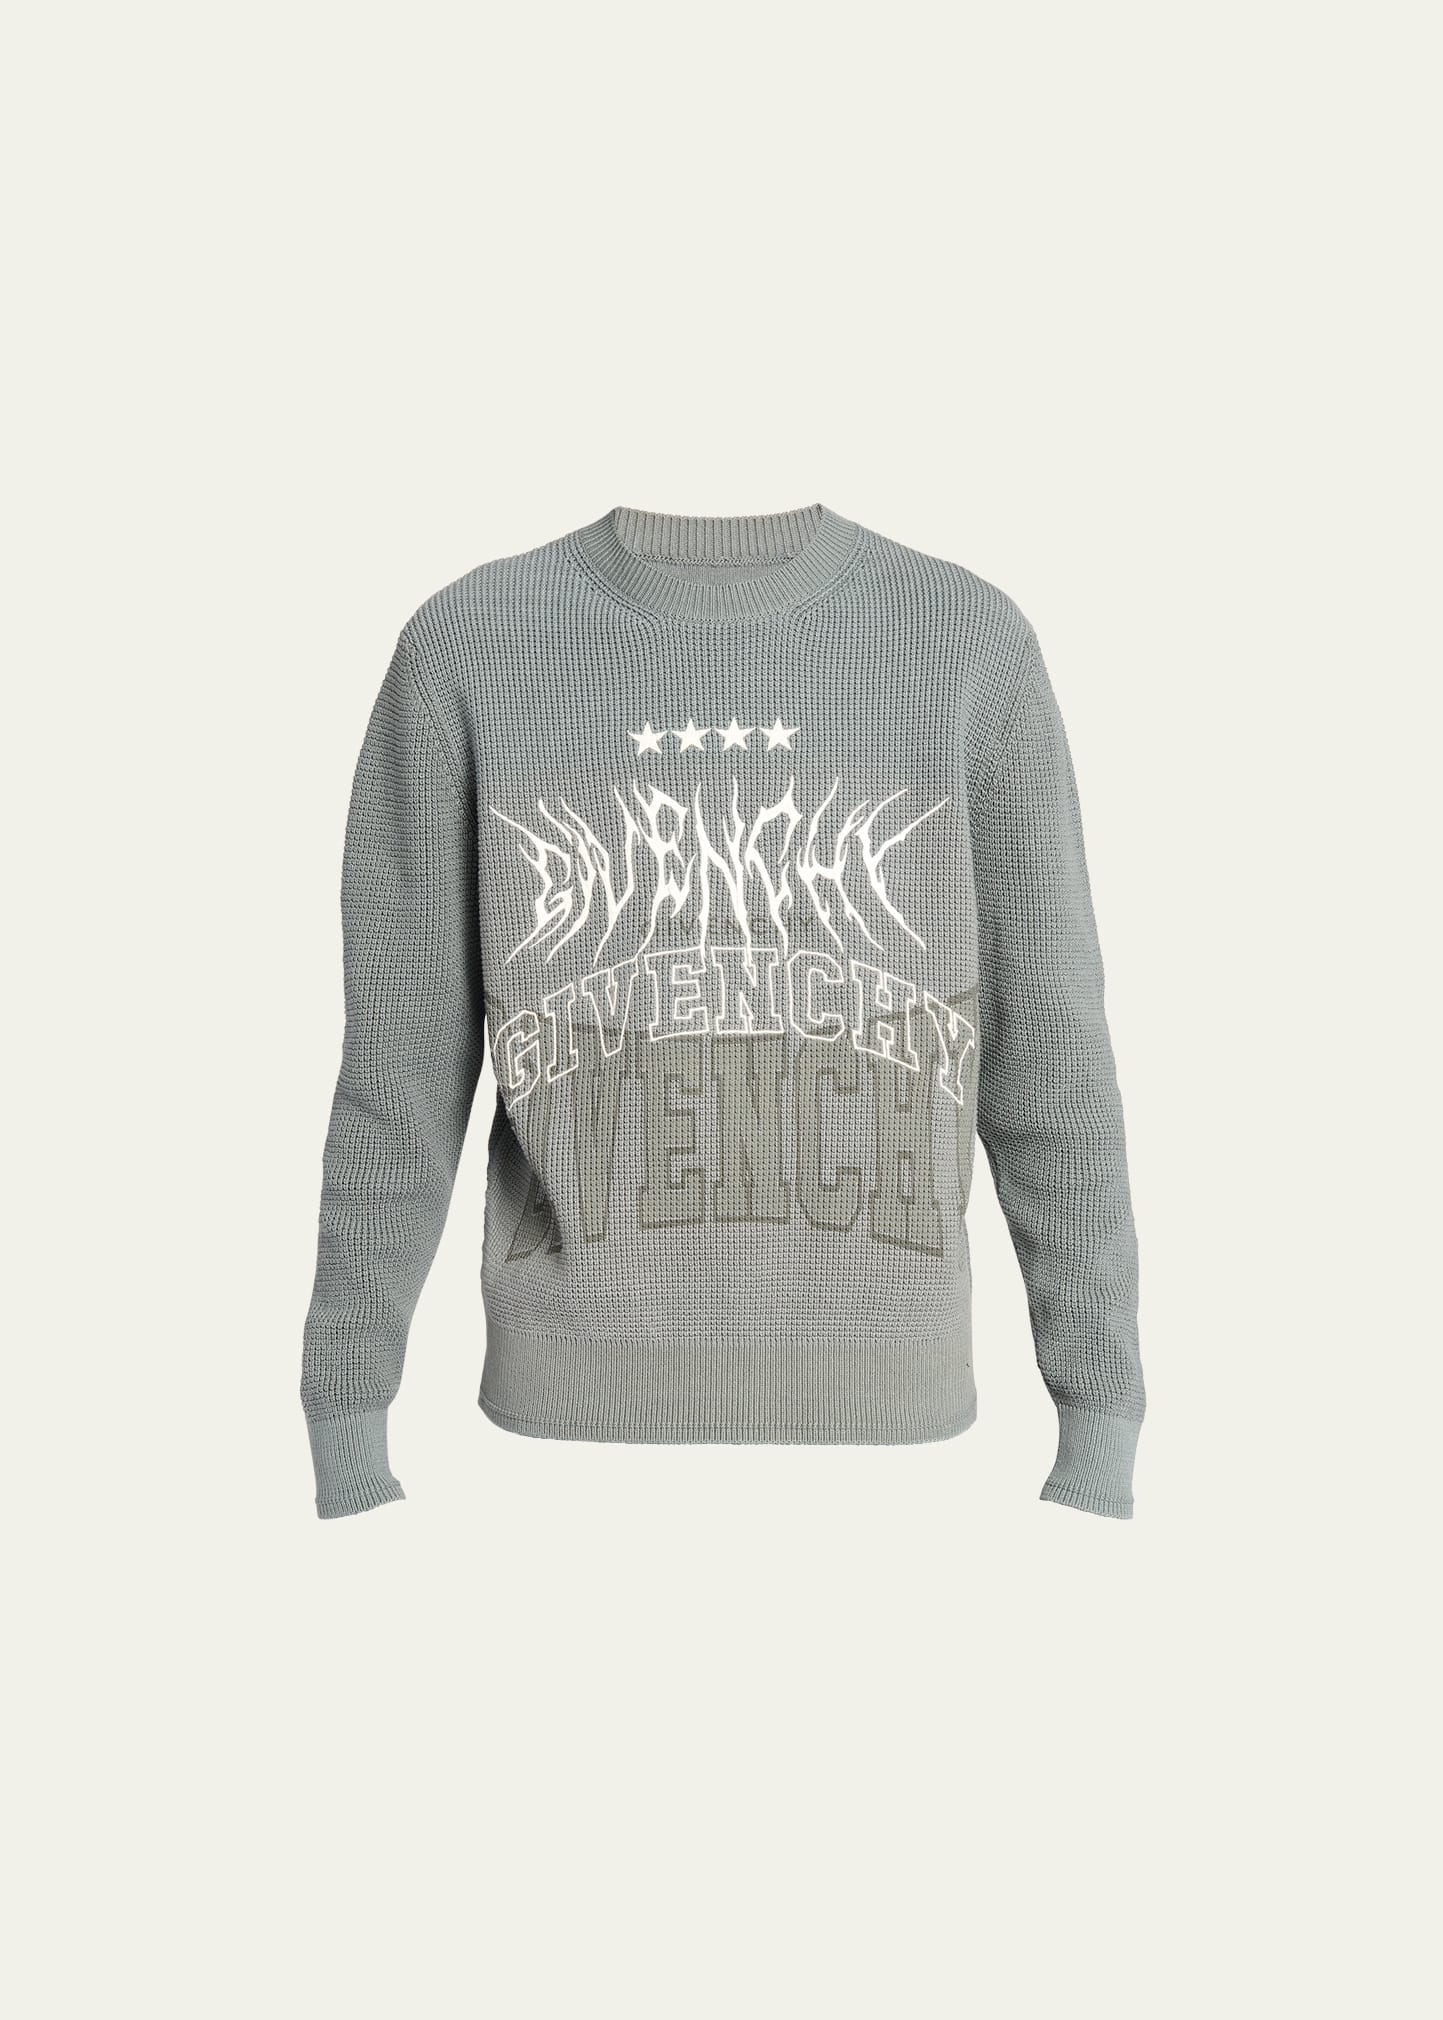 GIVENCHY MEN'S EMBROIDERED METAL LOGO SWEATER